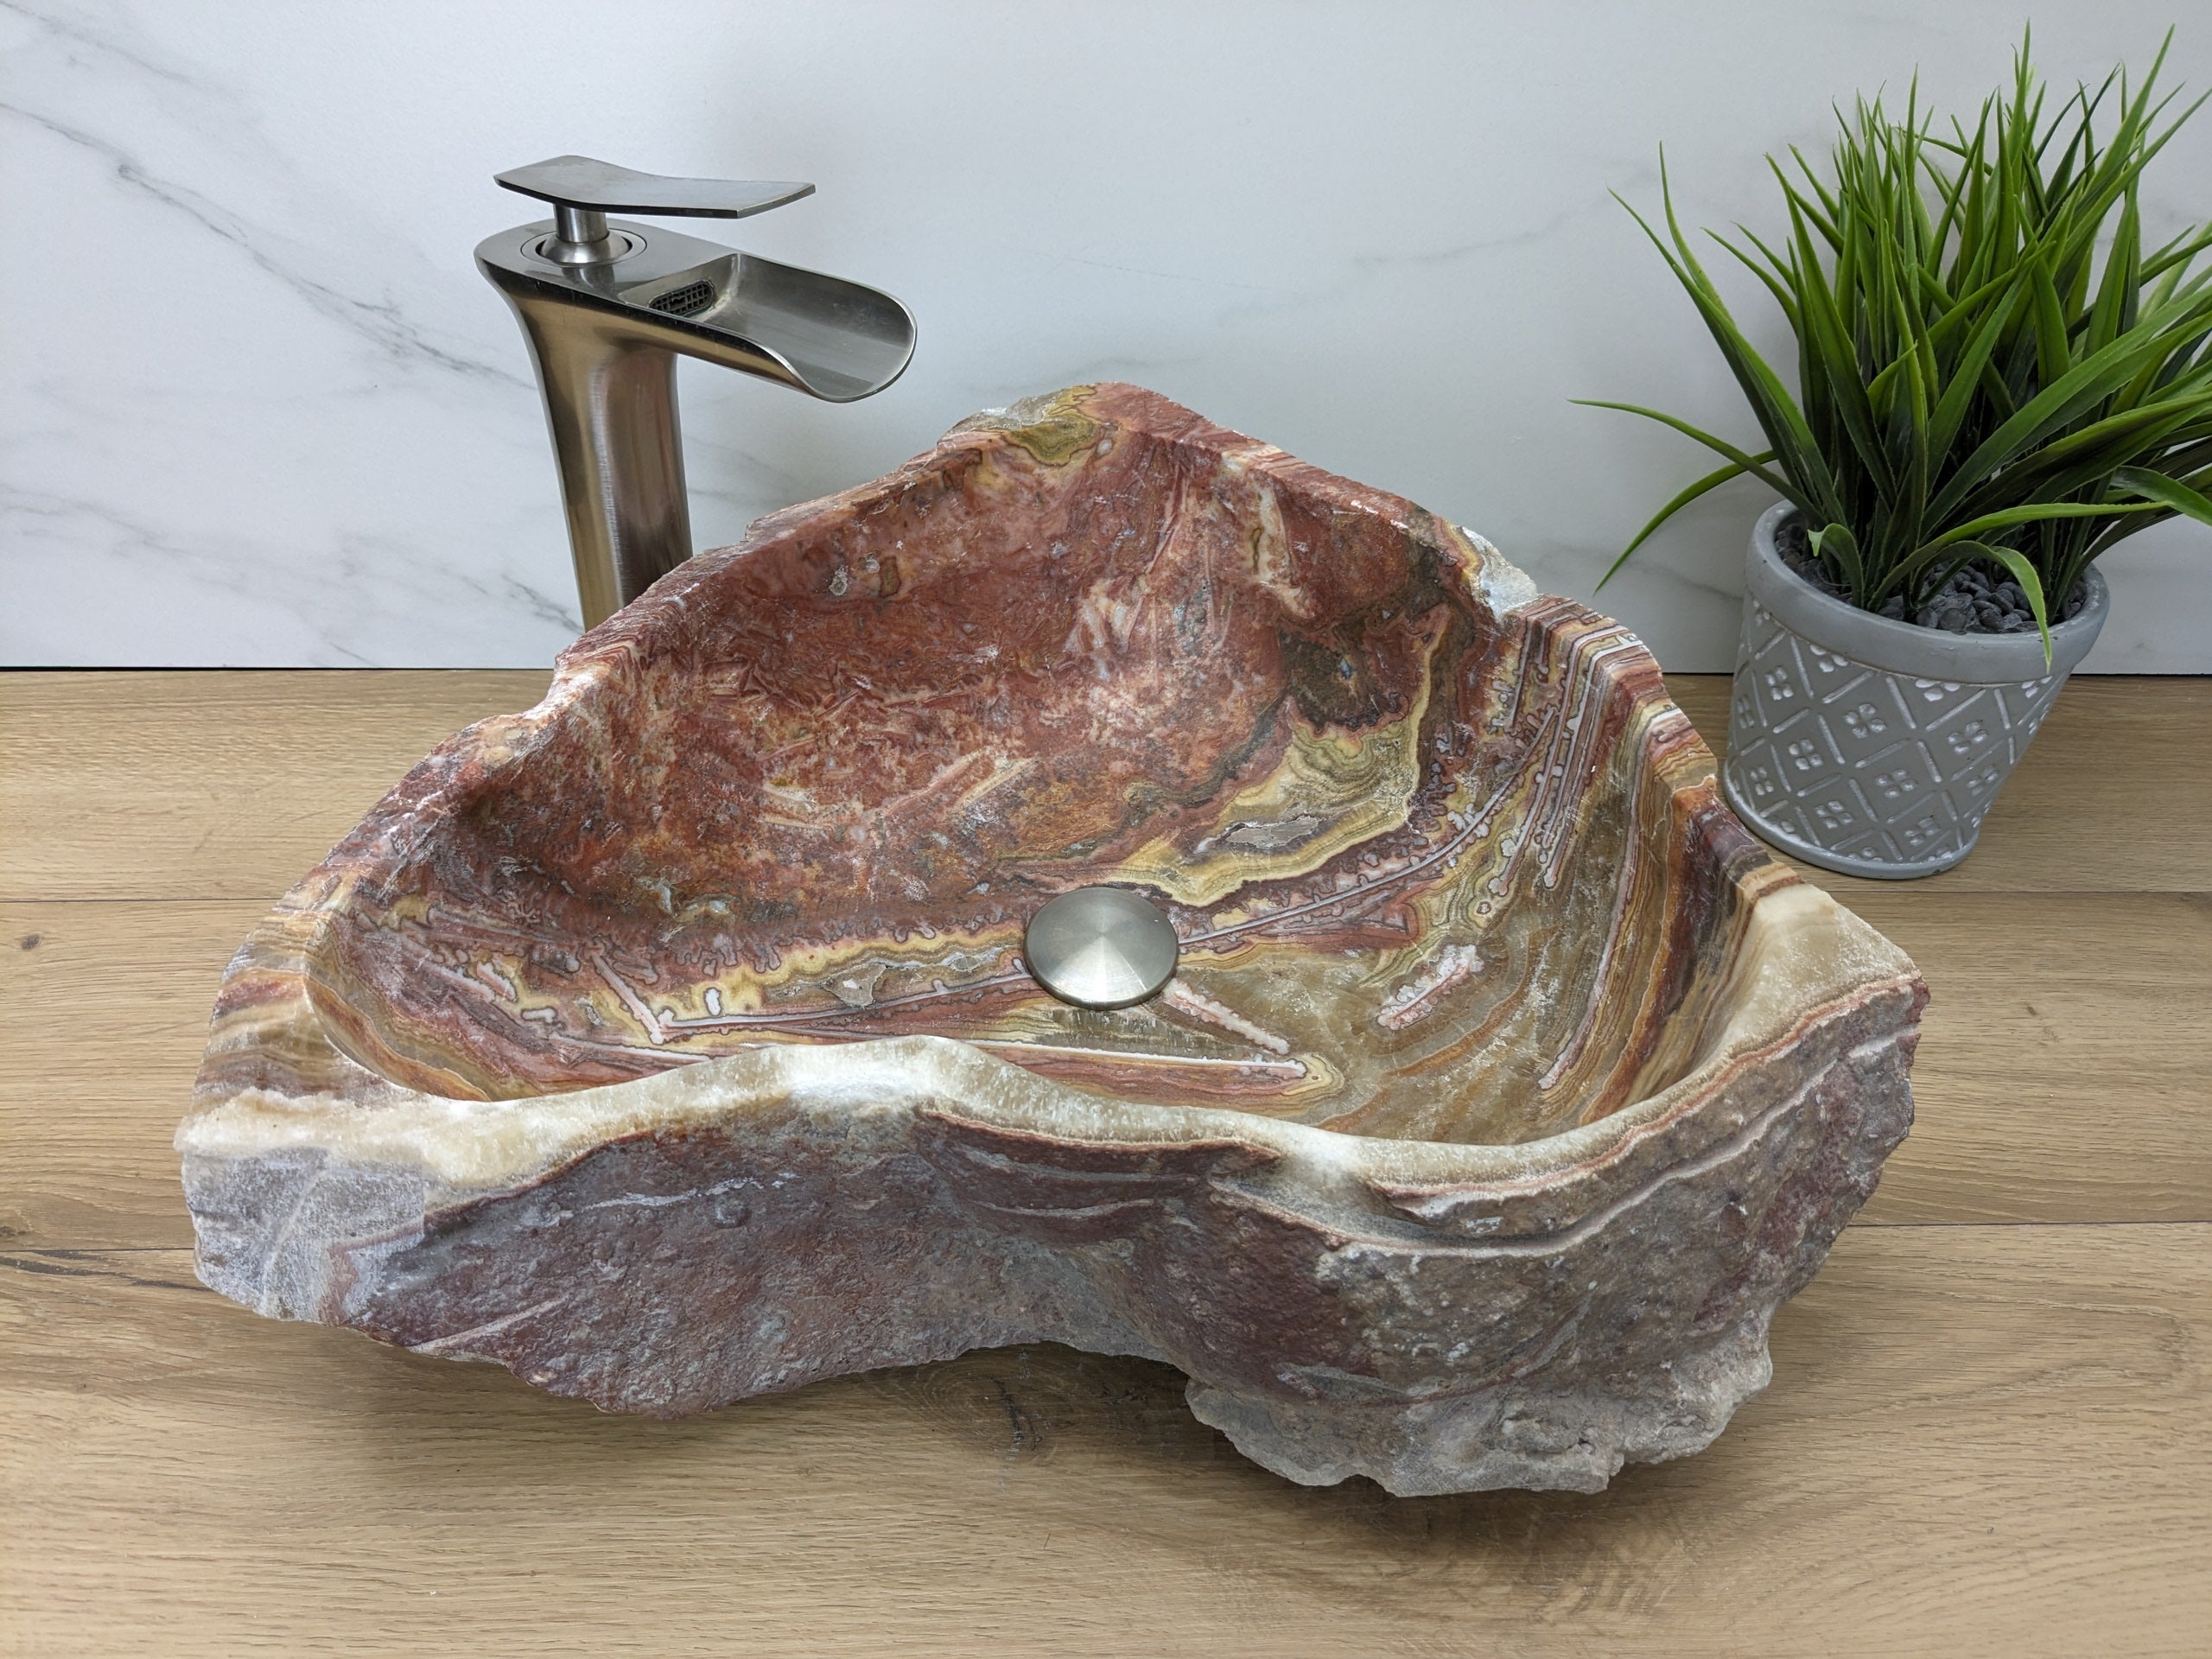 Pink and Tan Onyx Stone Vessel Bathroom Sink. Epoxy Sealant is available with fast shipping. Standard Drain Size. A beautiful work of rustic art. Handmade. Buy Now at www.felipeandgrace.com